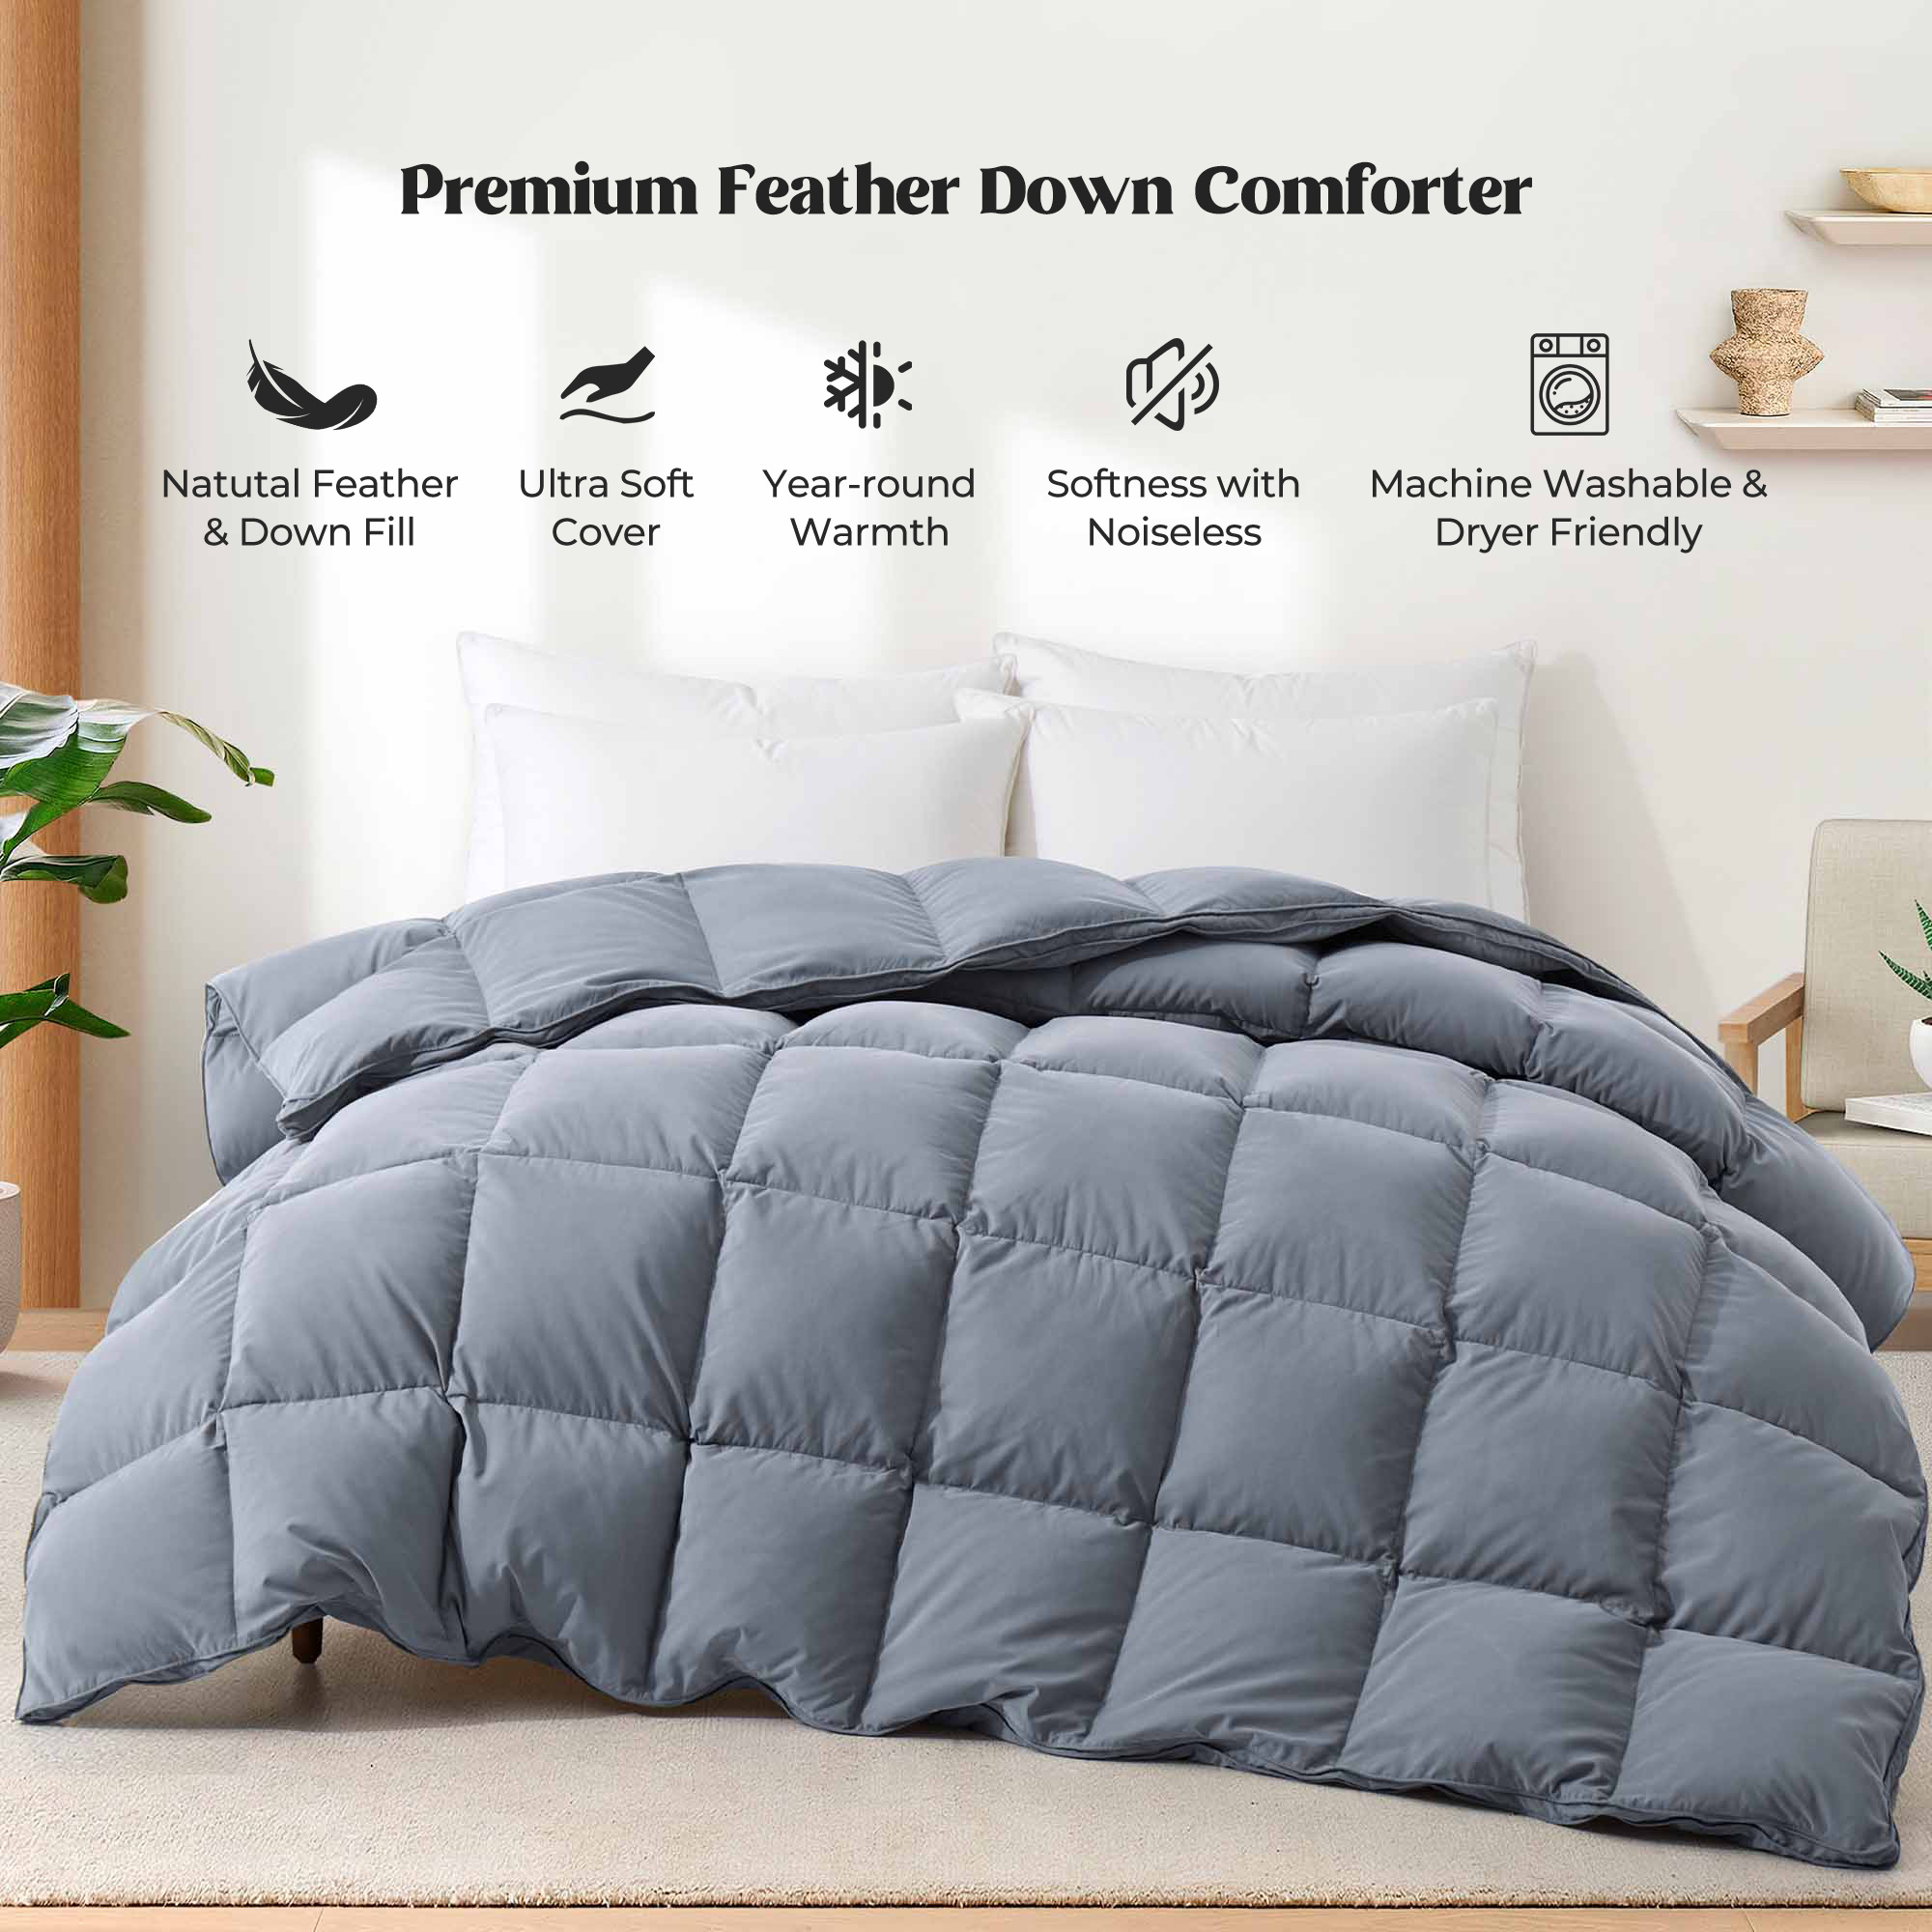 Medium Weight Goose Feather And Down Comforter - White, King